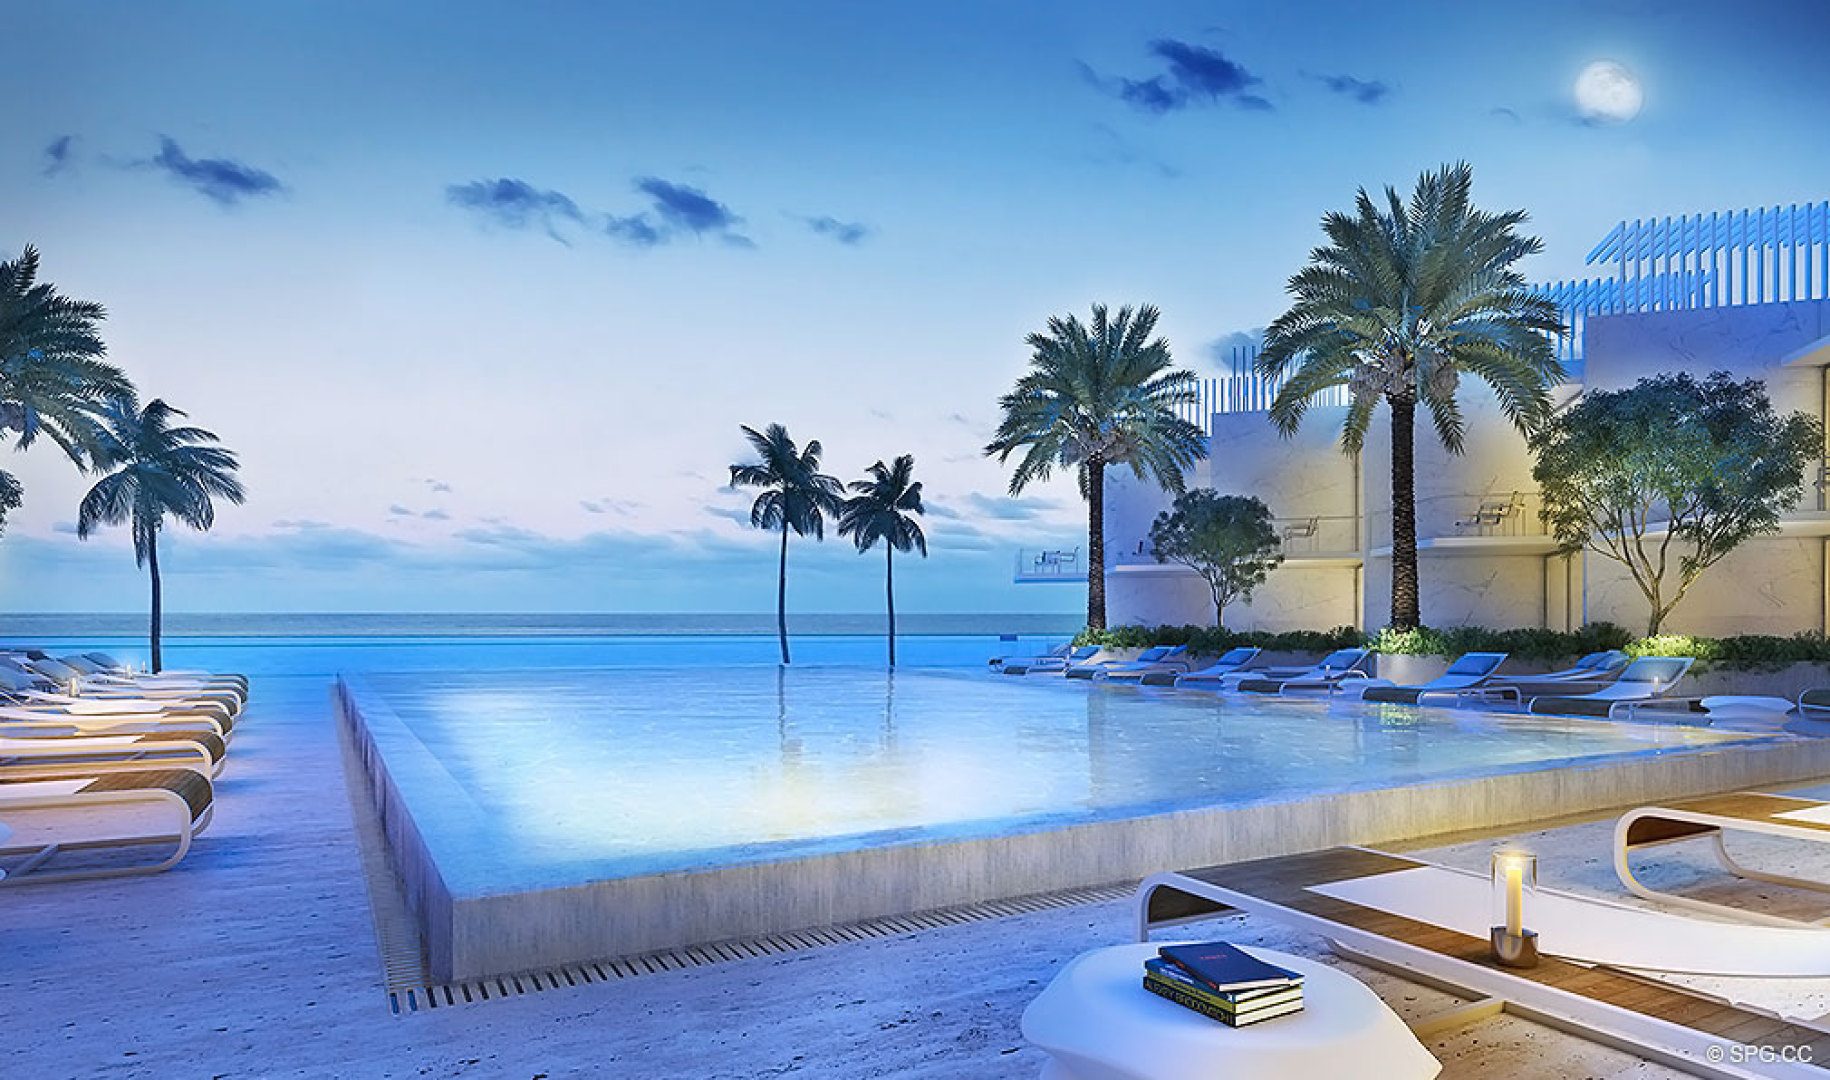 Pool Area at Turnberry Ocean Club, Luxury Oceanfront Condos Located at 18501 Collins Avenue, Sunny Isles Beach, Miami 33160